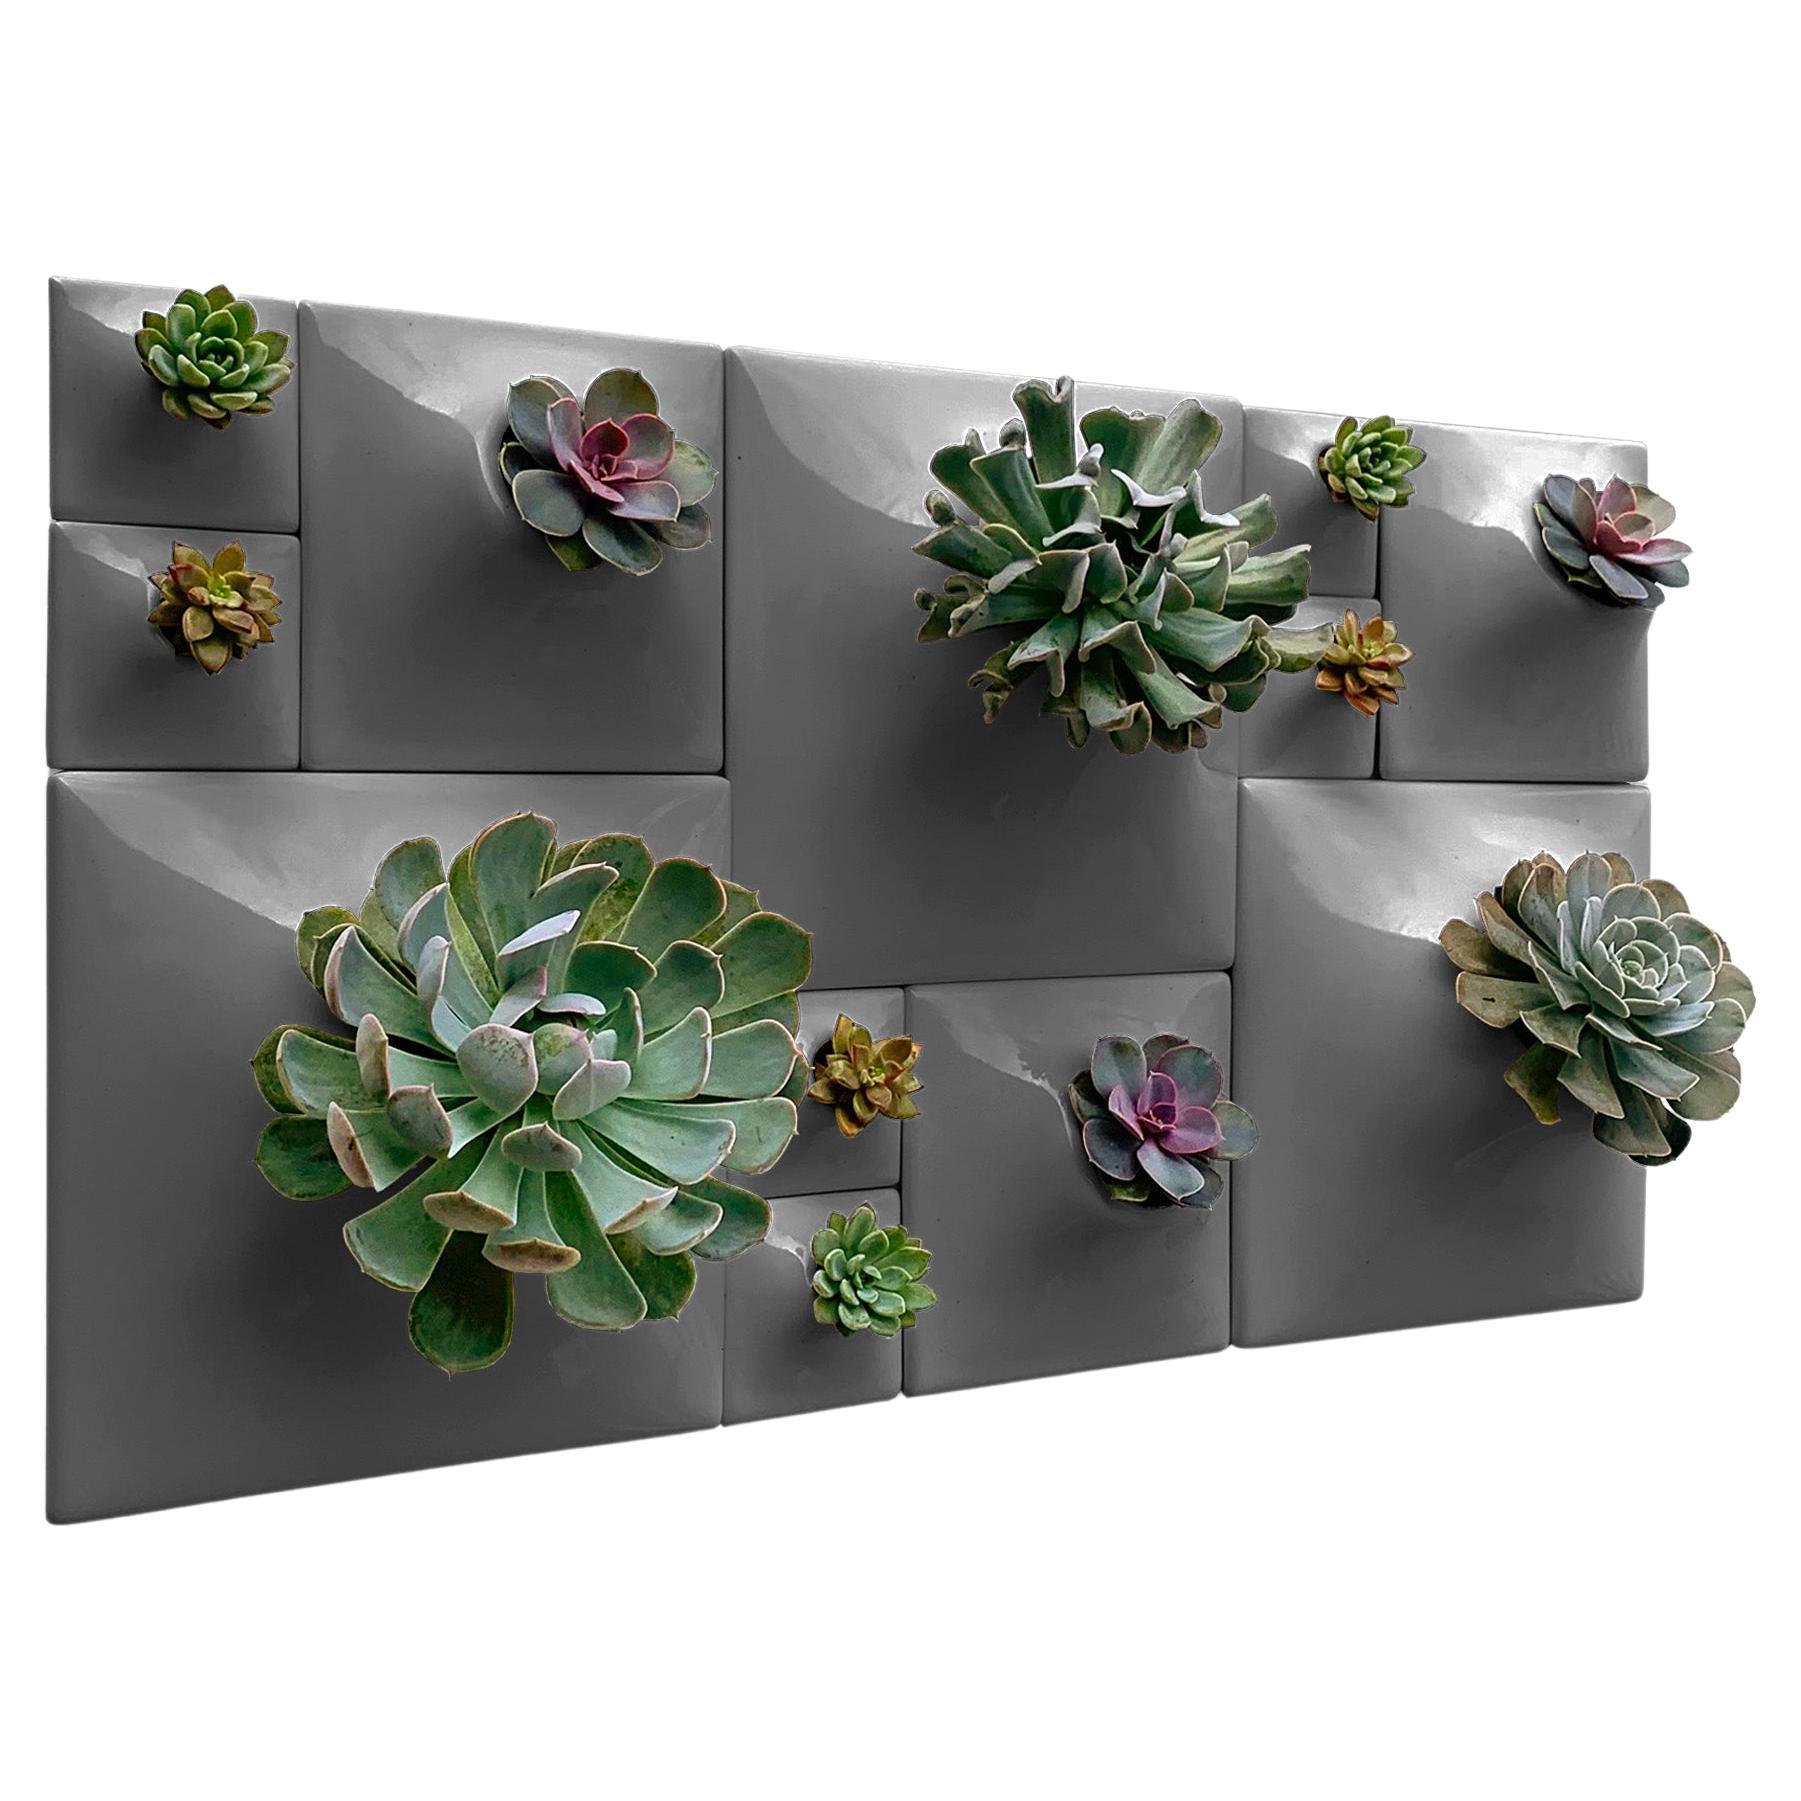 Modern Gray Greenwall, Mid Century Modern Wall Decor, Moss Wall Art, Node BS3D

Transform your modern interior design into an exciting greenwall and epicenter of living wall art with this striking Node Wall Planter set. Let your eyes wander over